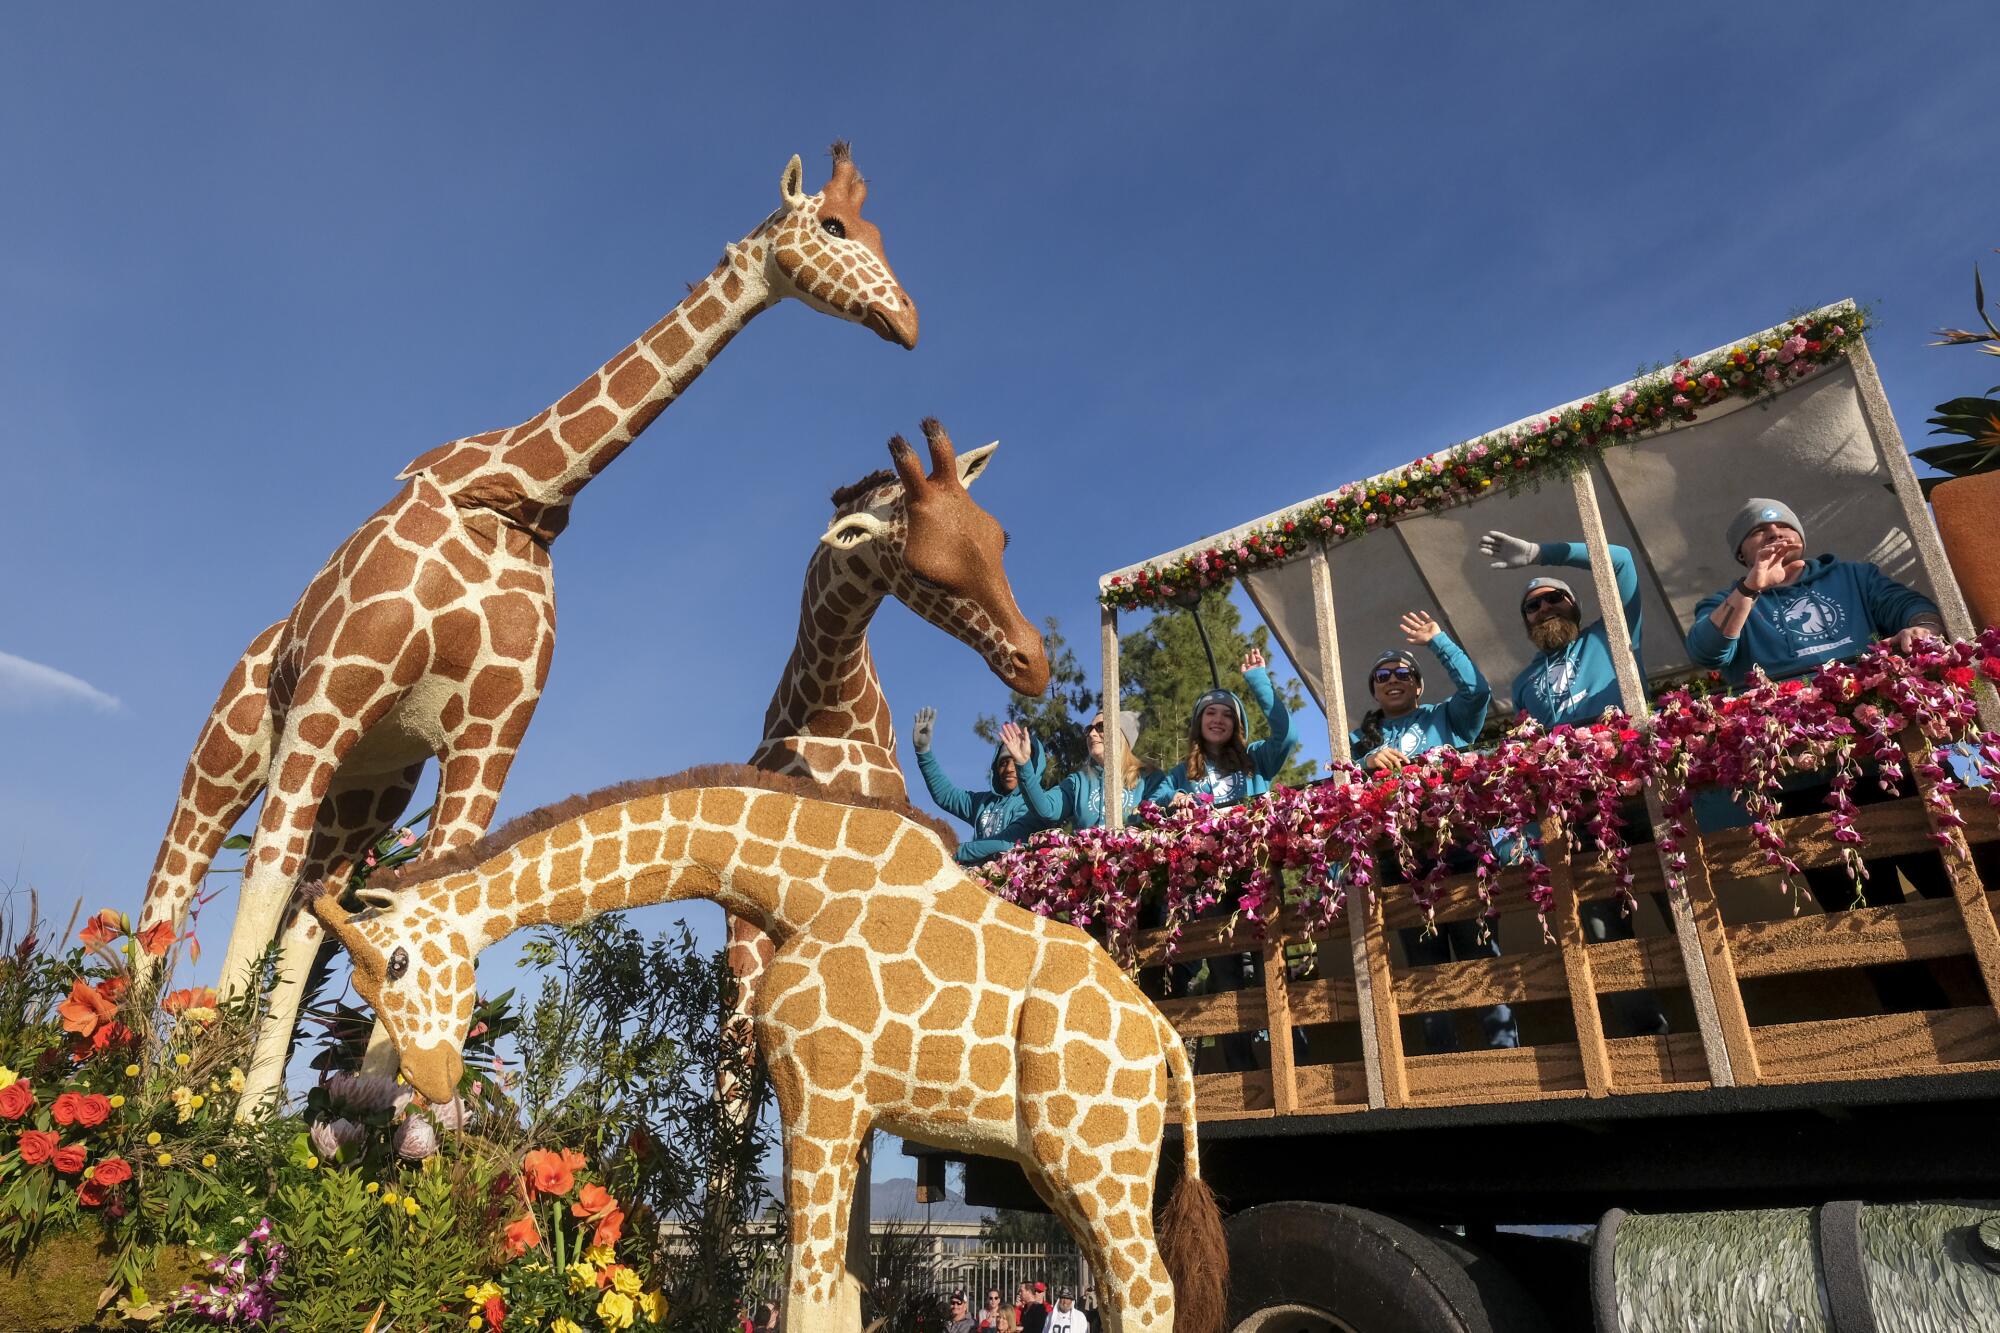 A Rose Parade float with giraffes.